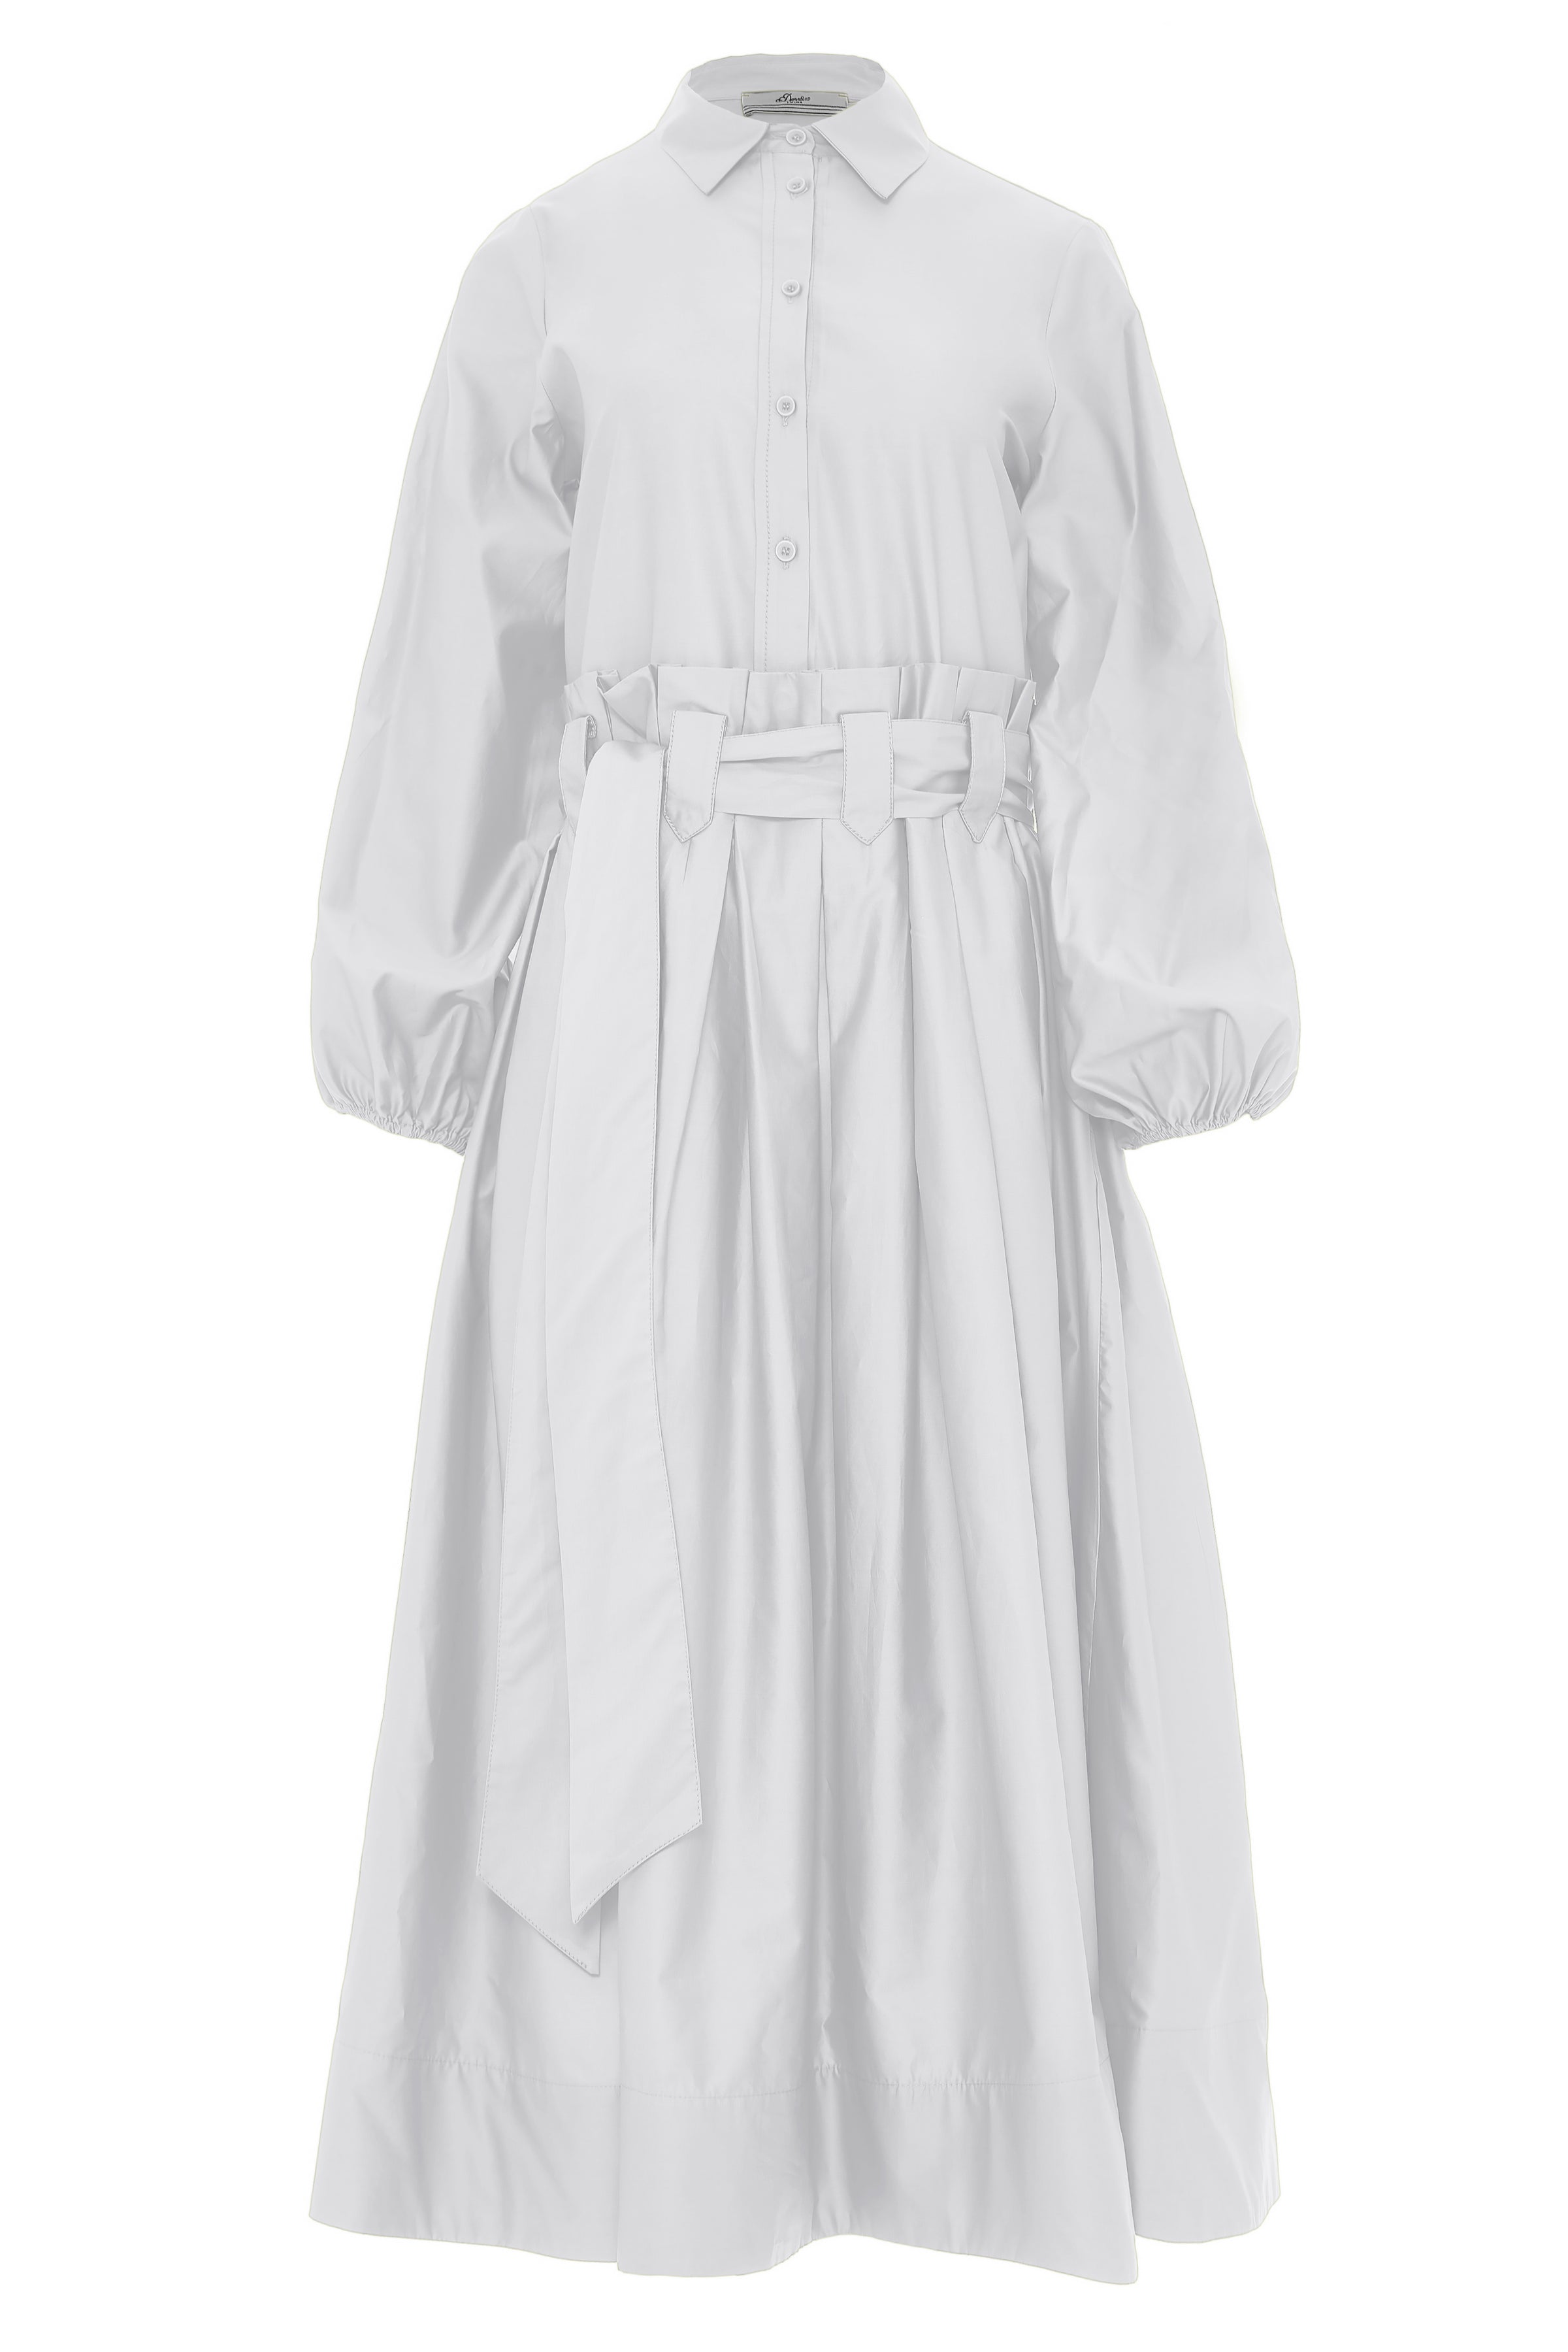 White midi dress with half placket full skirt long sleeves collar and statement box pleats at waist and belt loops